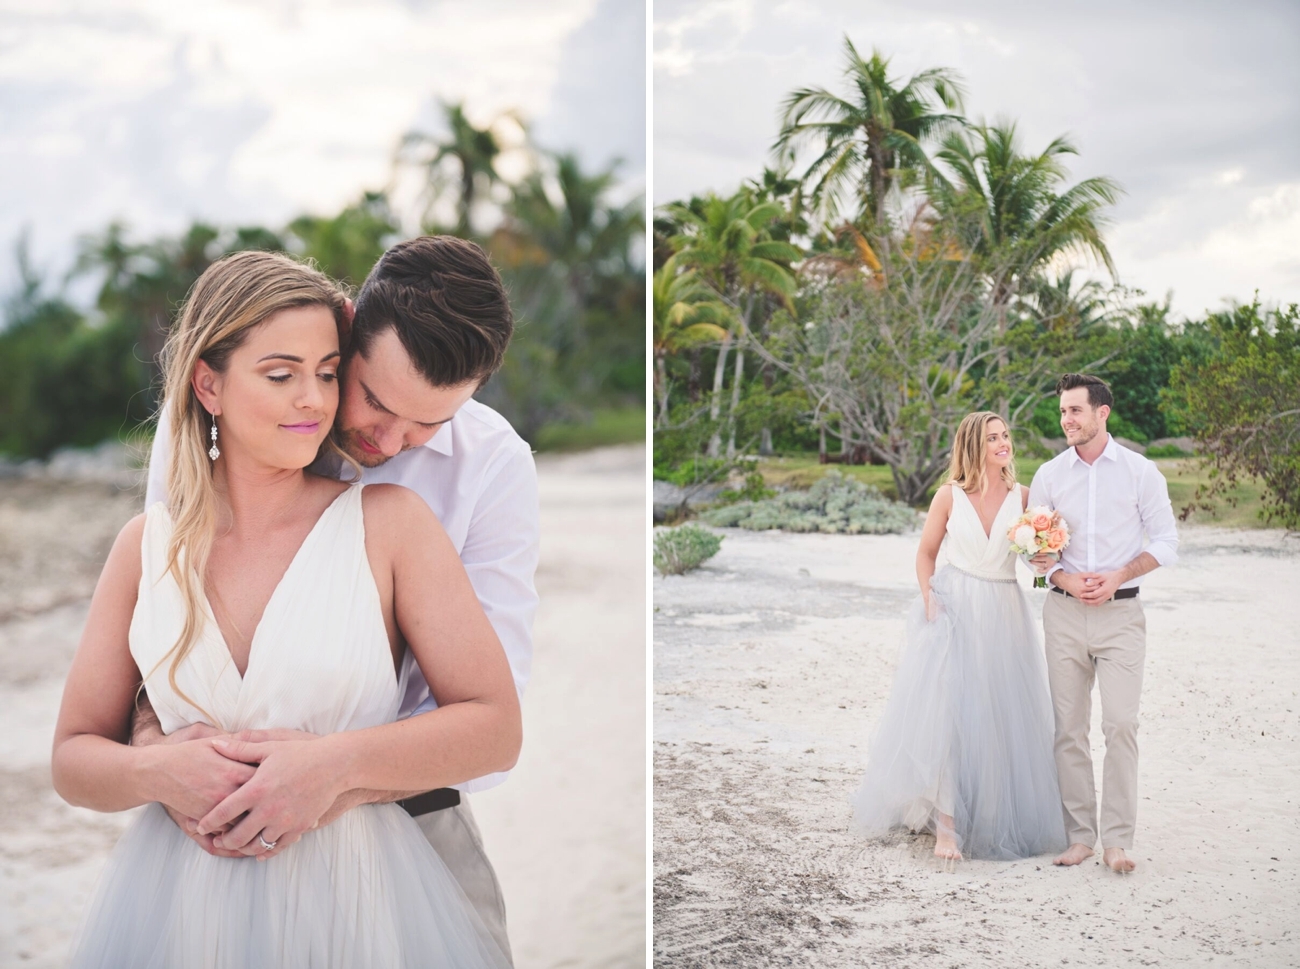 7 Reasons to Have a Destination Wedding | SouthBound Bride